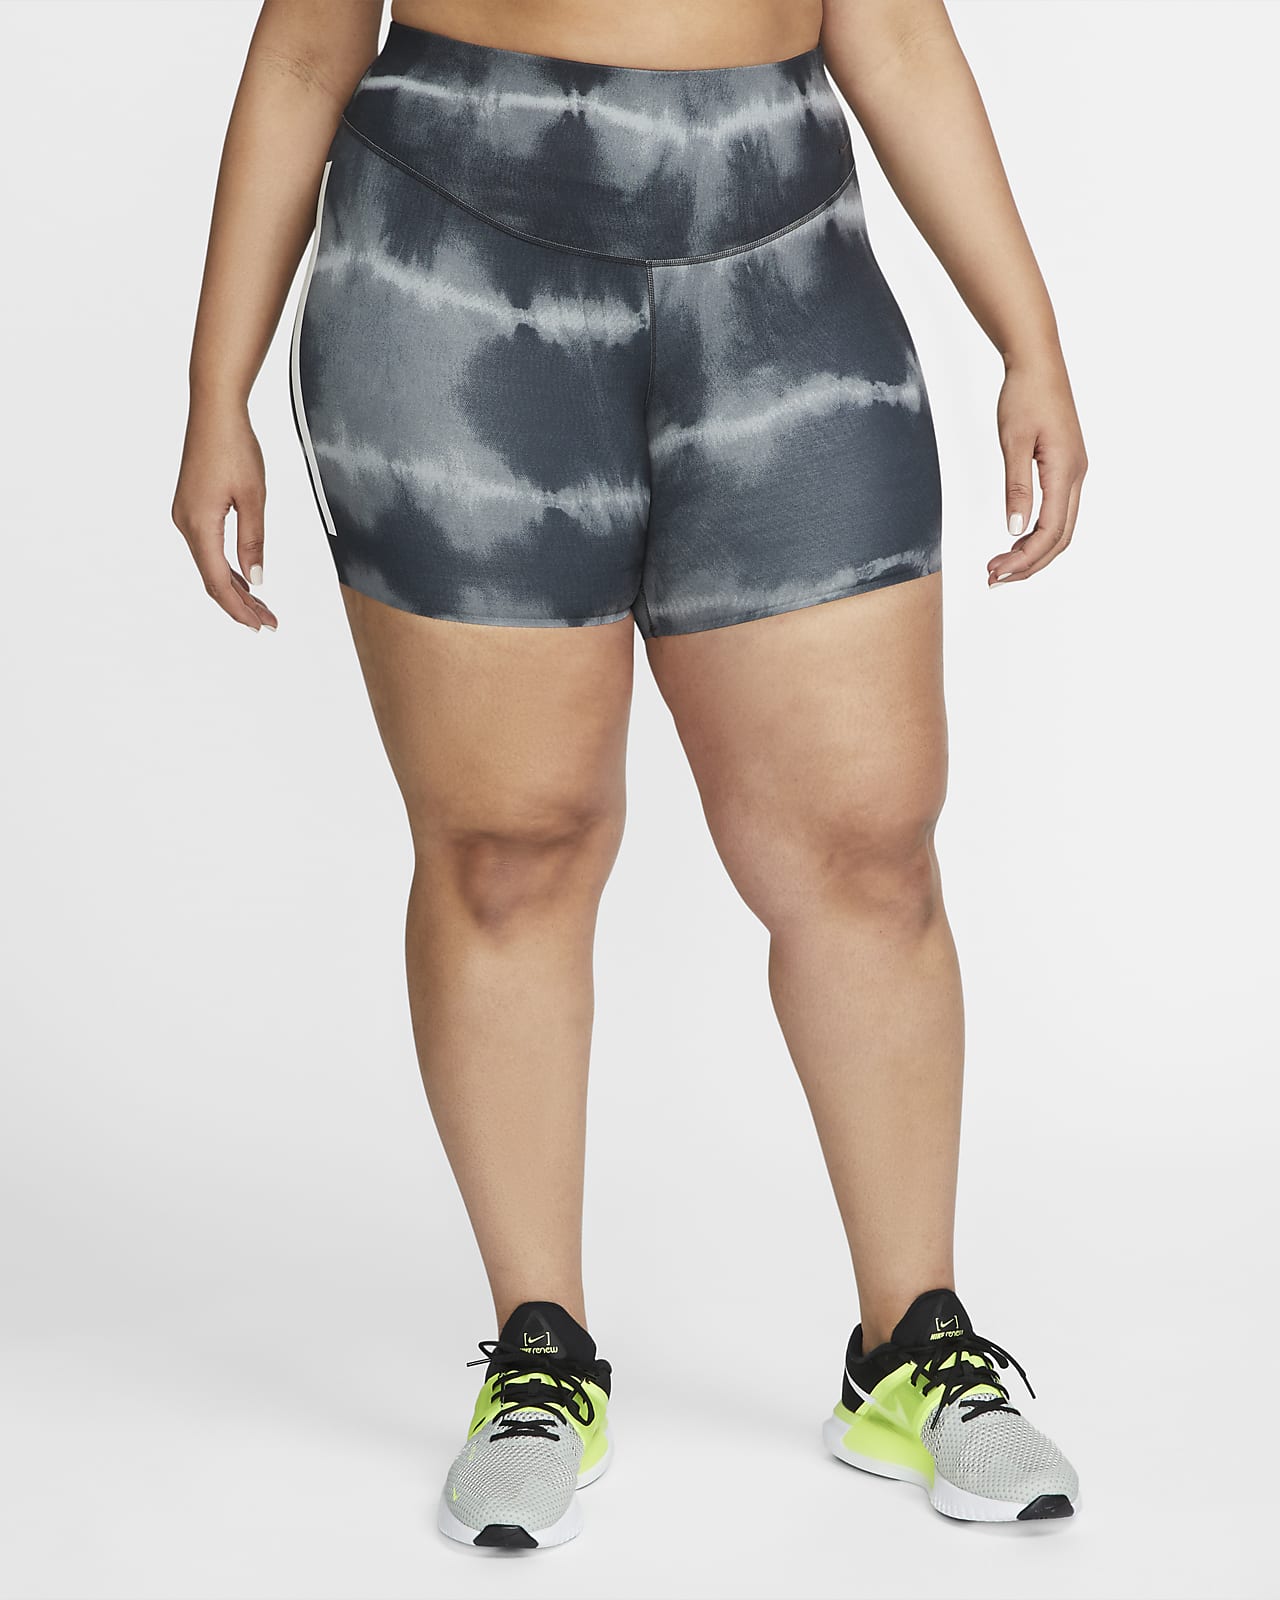 Nike One Luxe Women's 7" Mid-Rise Printed Training Shorts (Plus Size)